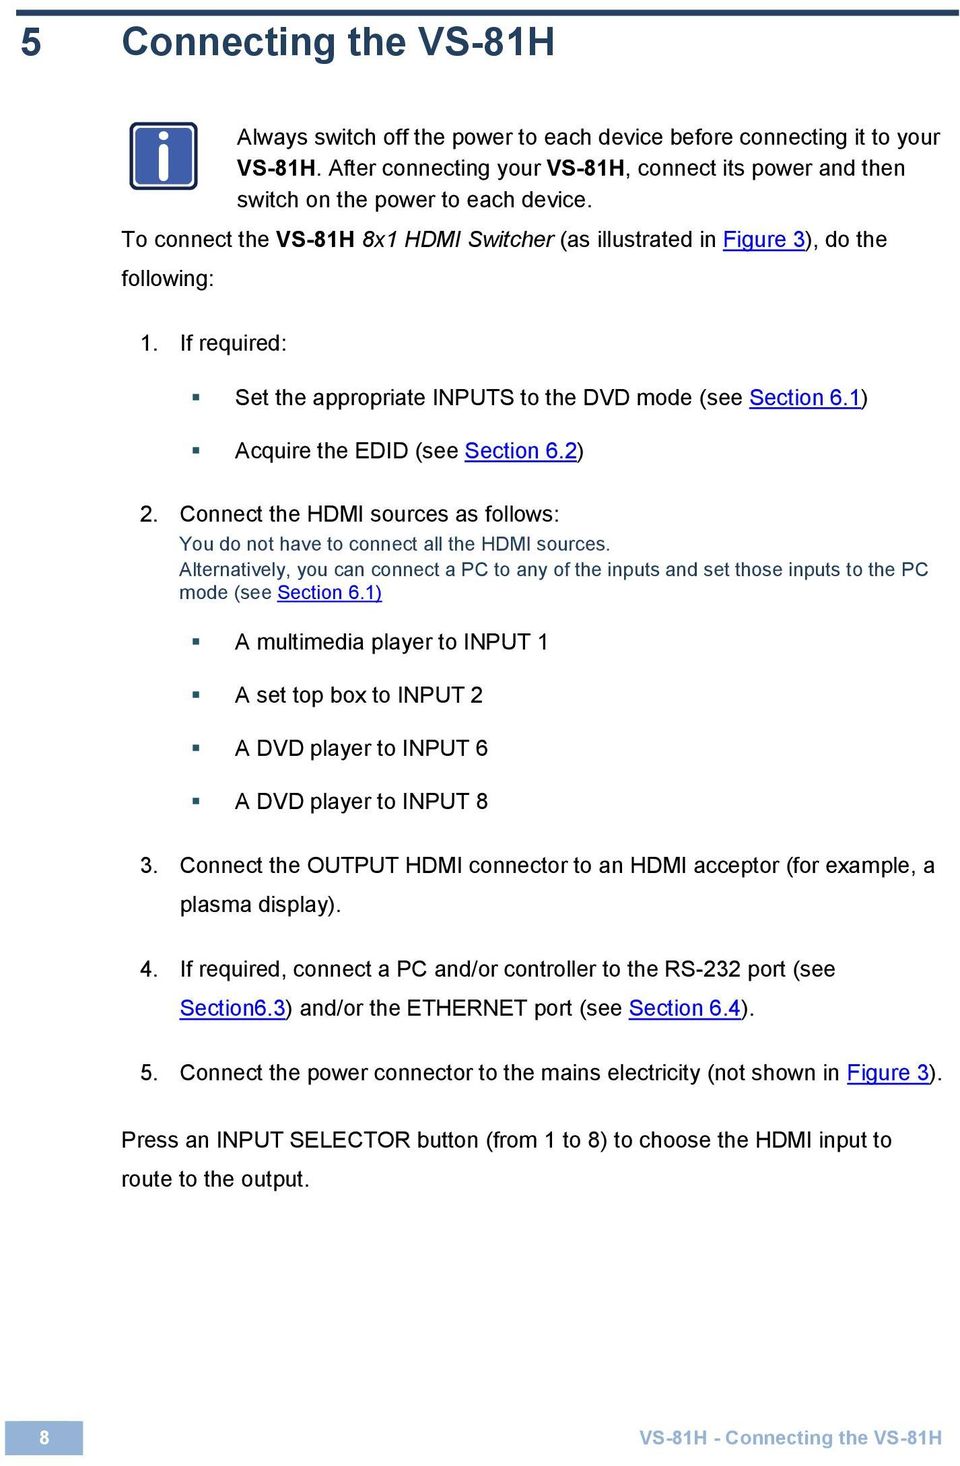 1) Acquire the EDID (see Section 6.2) 2. Connect the HDMI sources as follows: You do not have to connect all the HDMI sources.